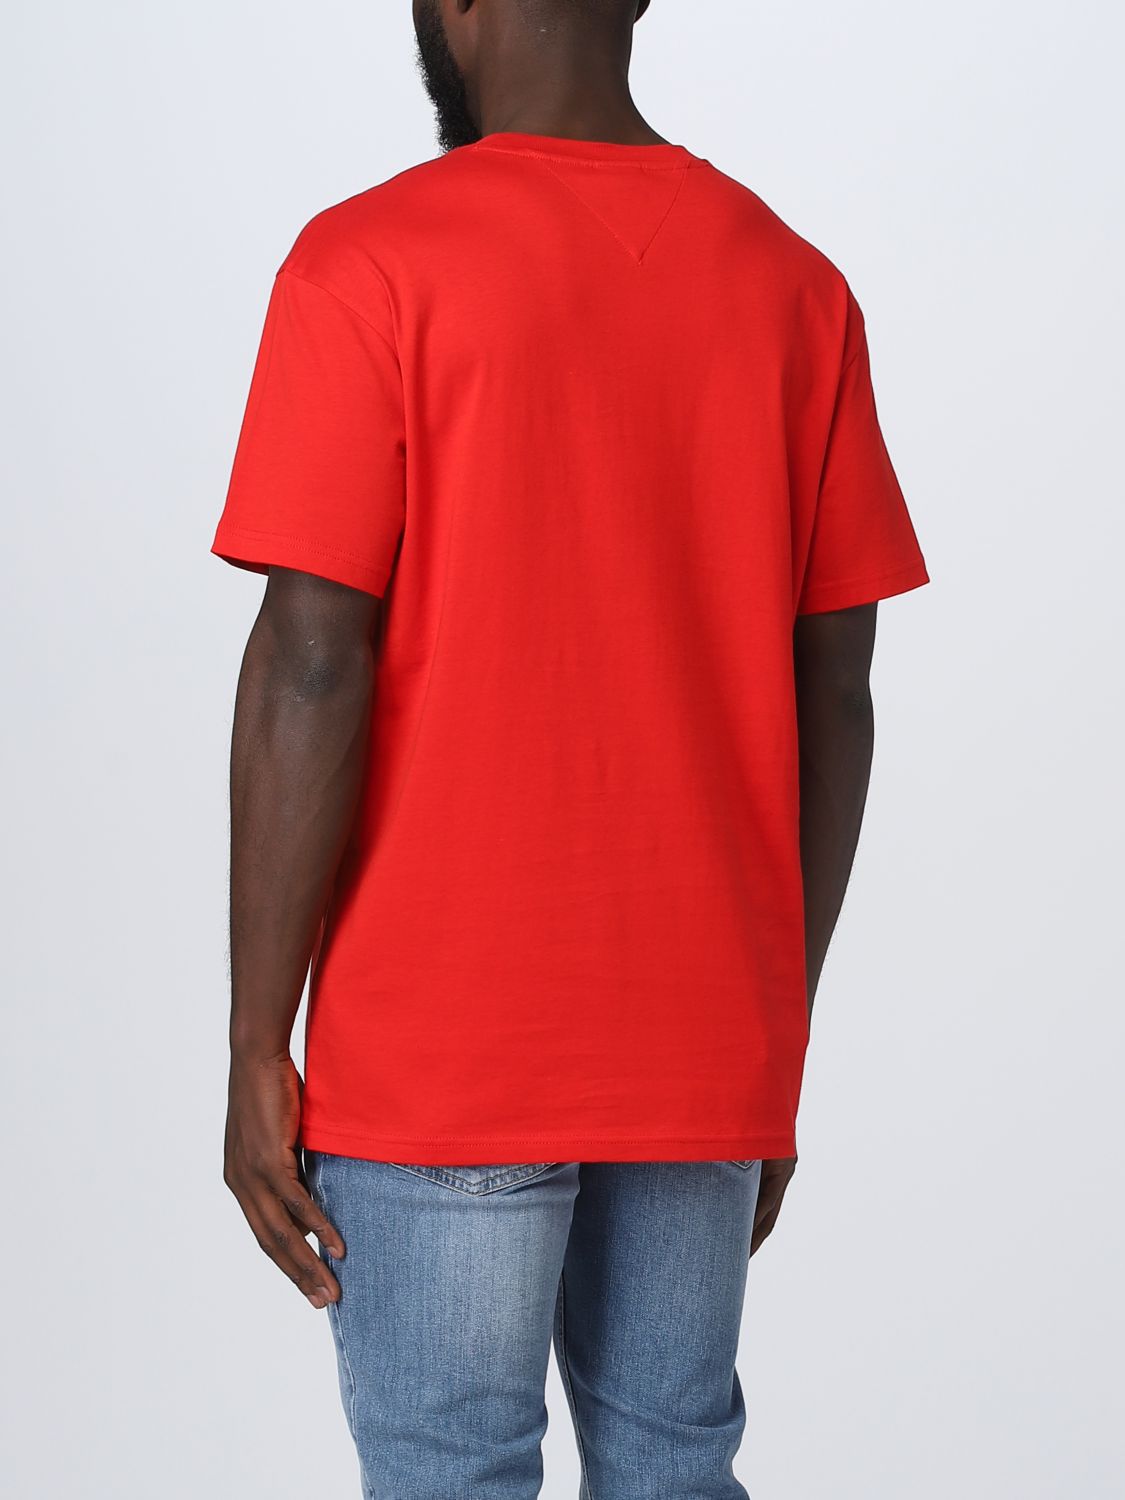 TOMMY JEANS: t-shirt for man - Red | Tommy Jeans t-shirt DM0DM14984 ...